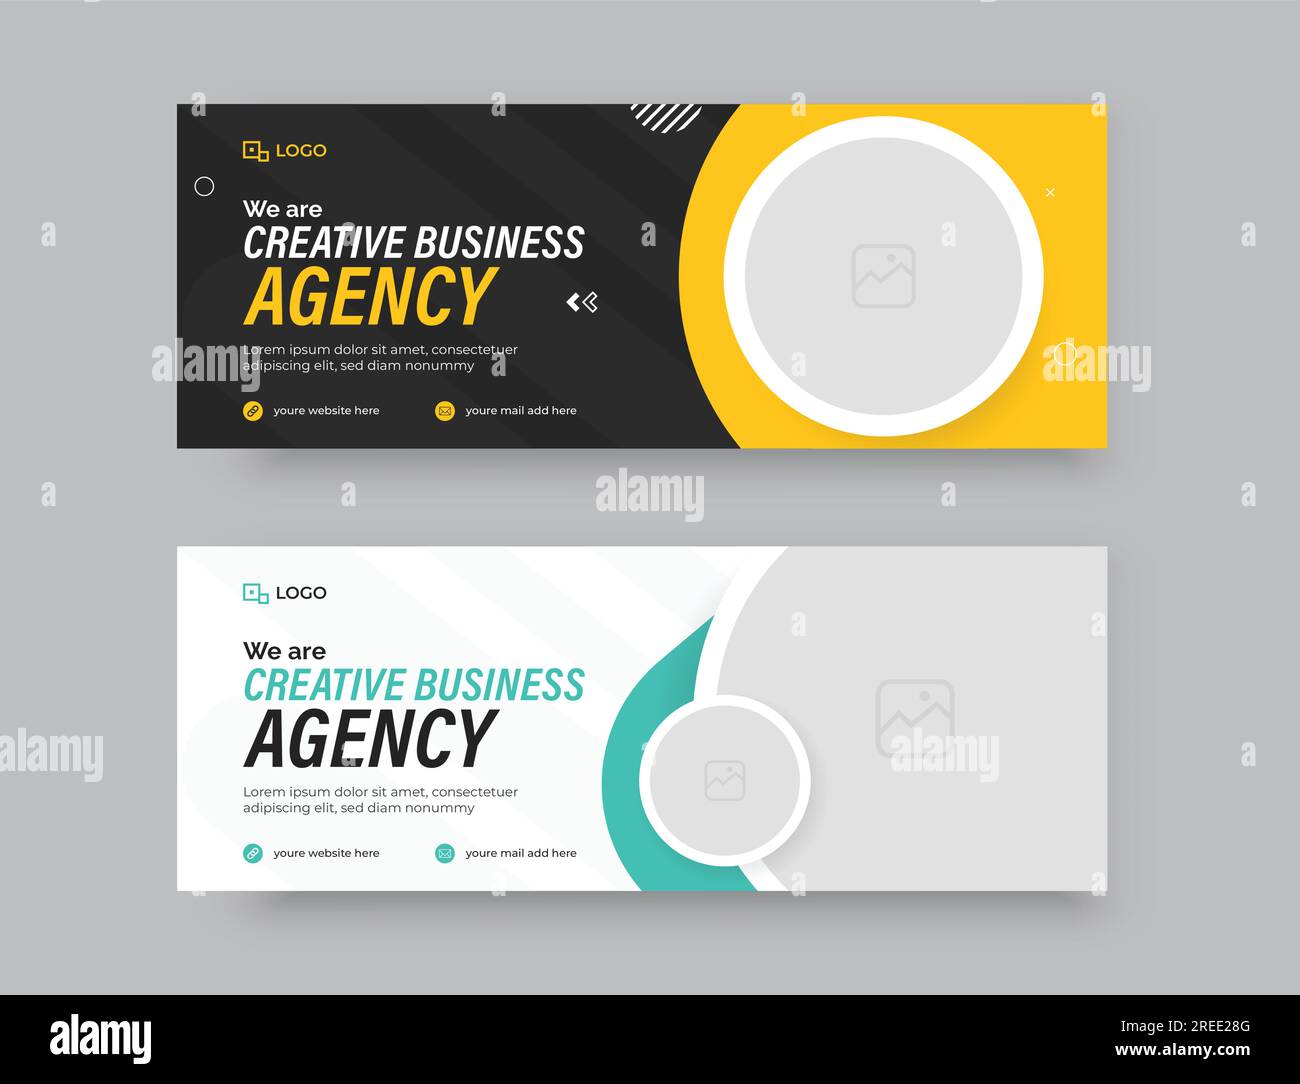 Modern professional Creative Business Agency marketing social media Facebook cover or web banner template. Stock Vector